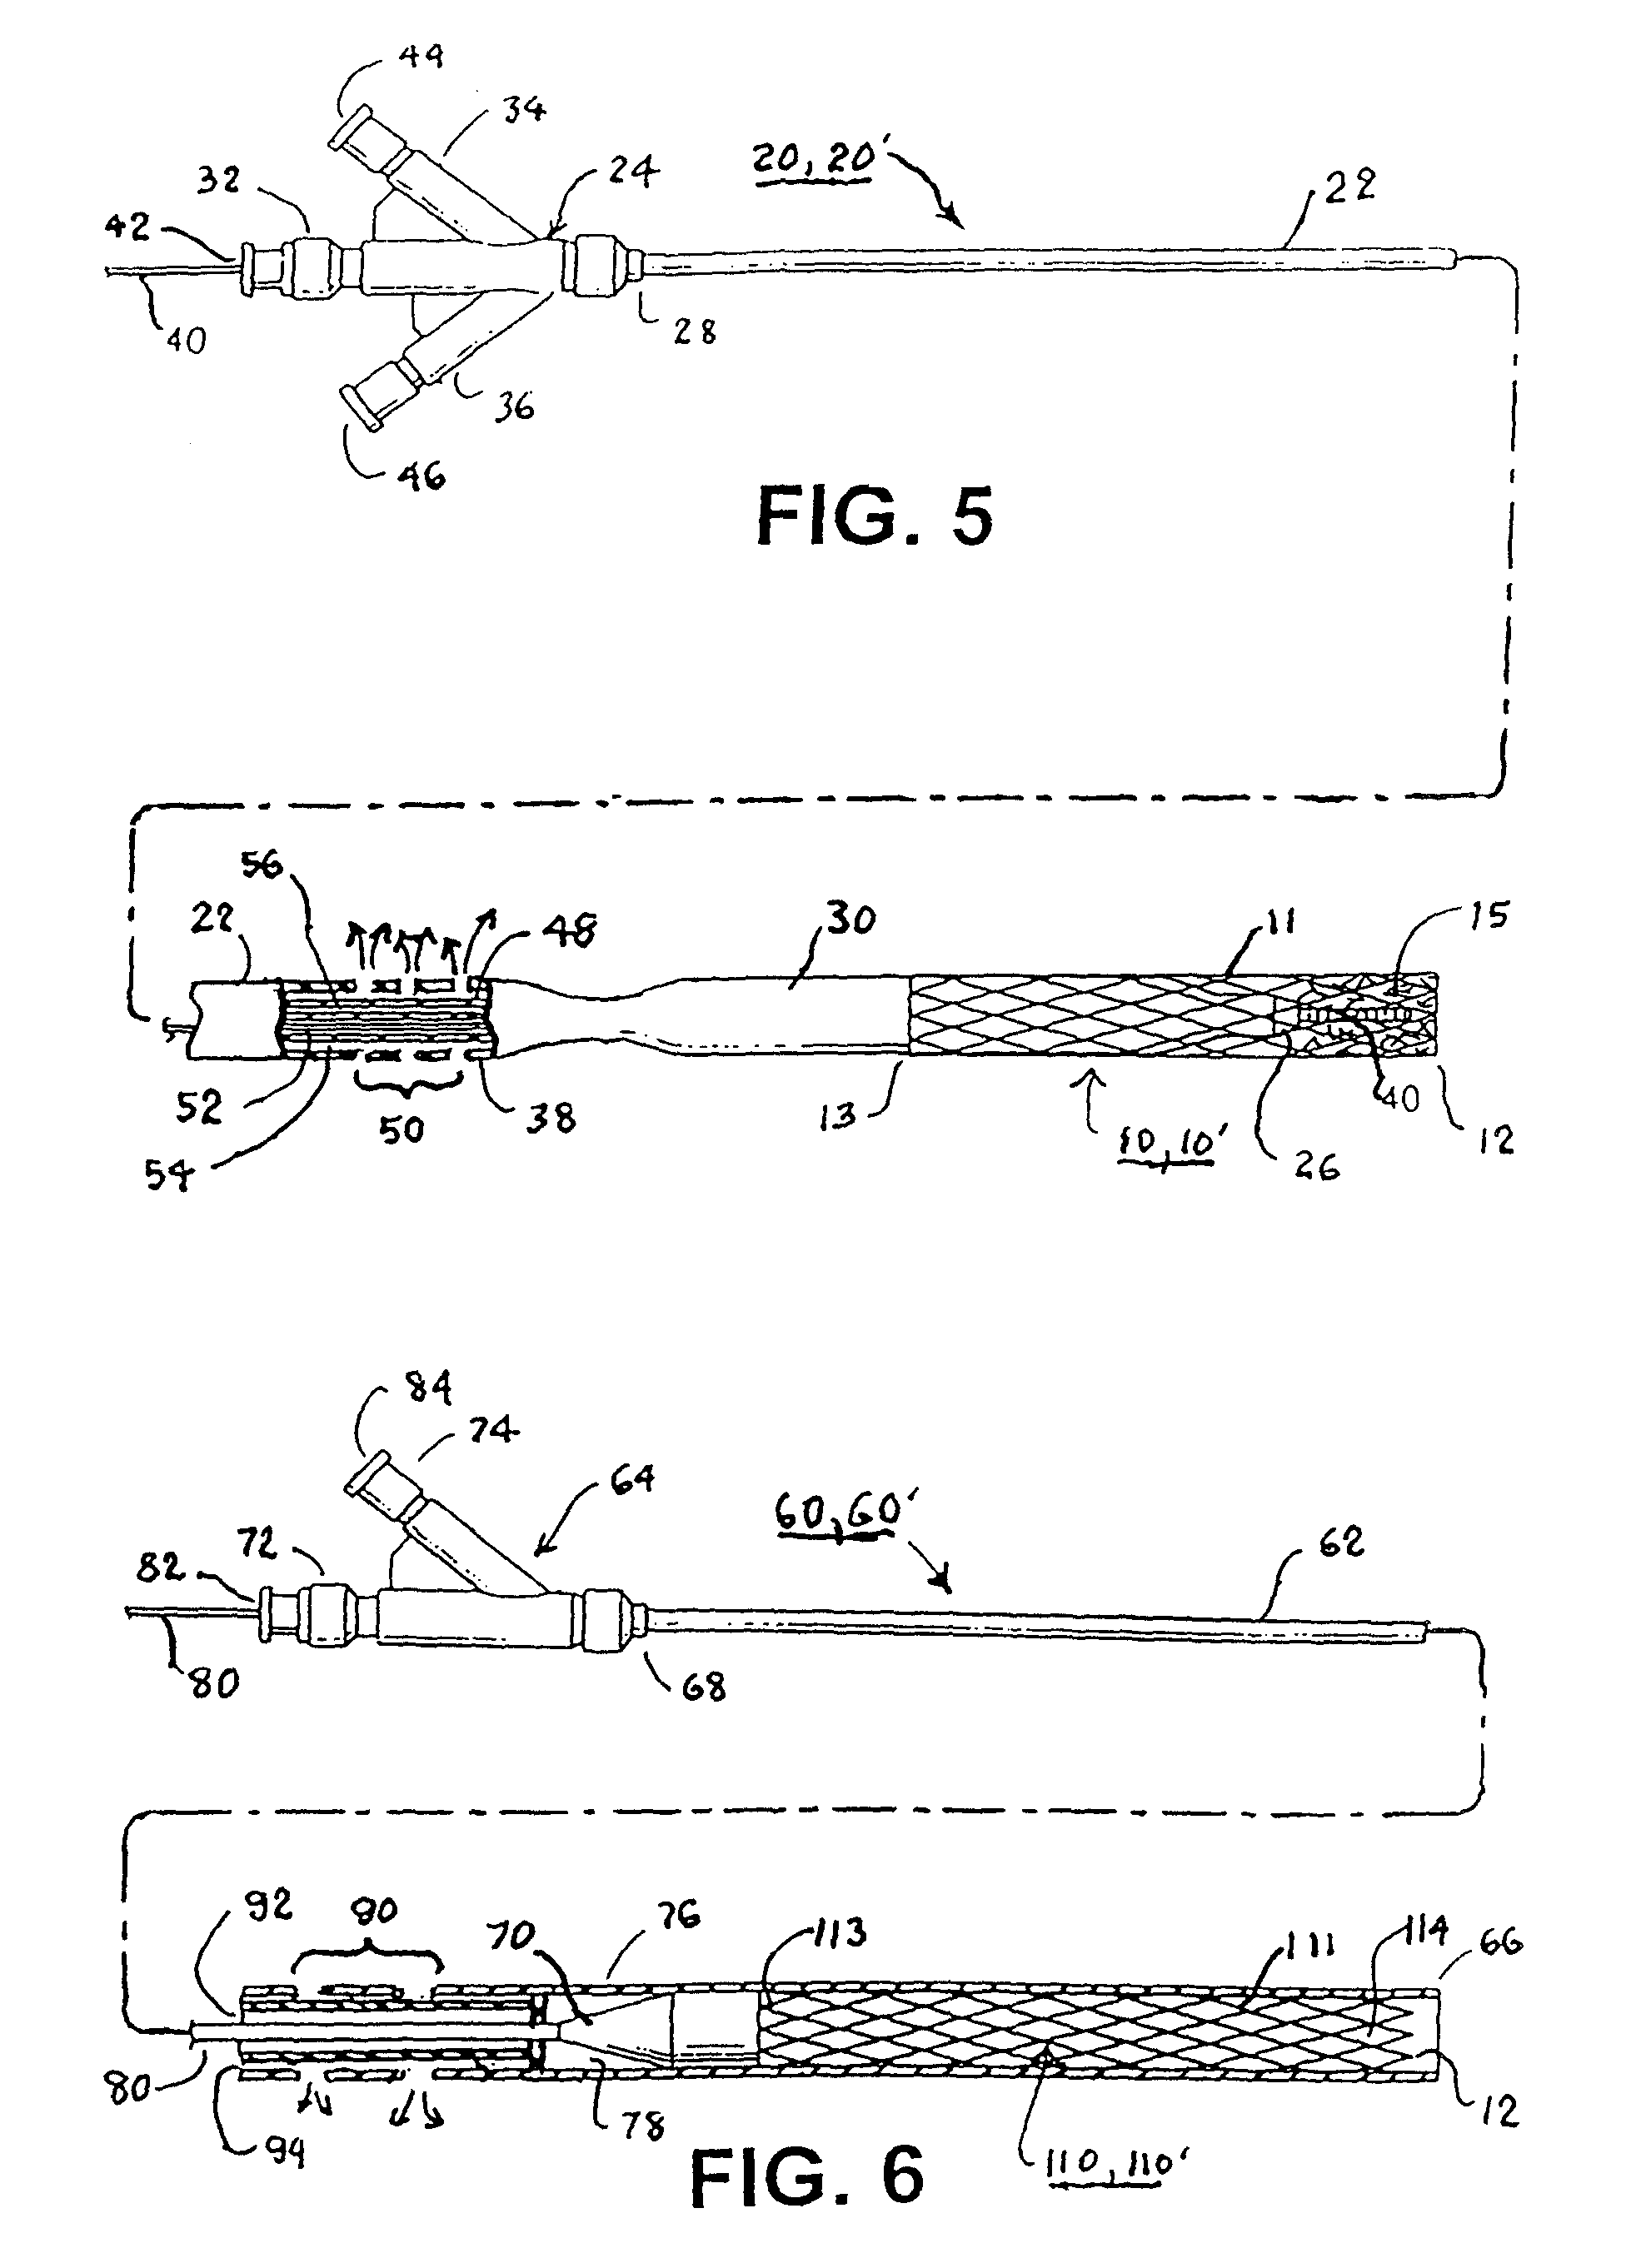 Methods and apparatus for occluding reproductive tracts to effect contraception